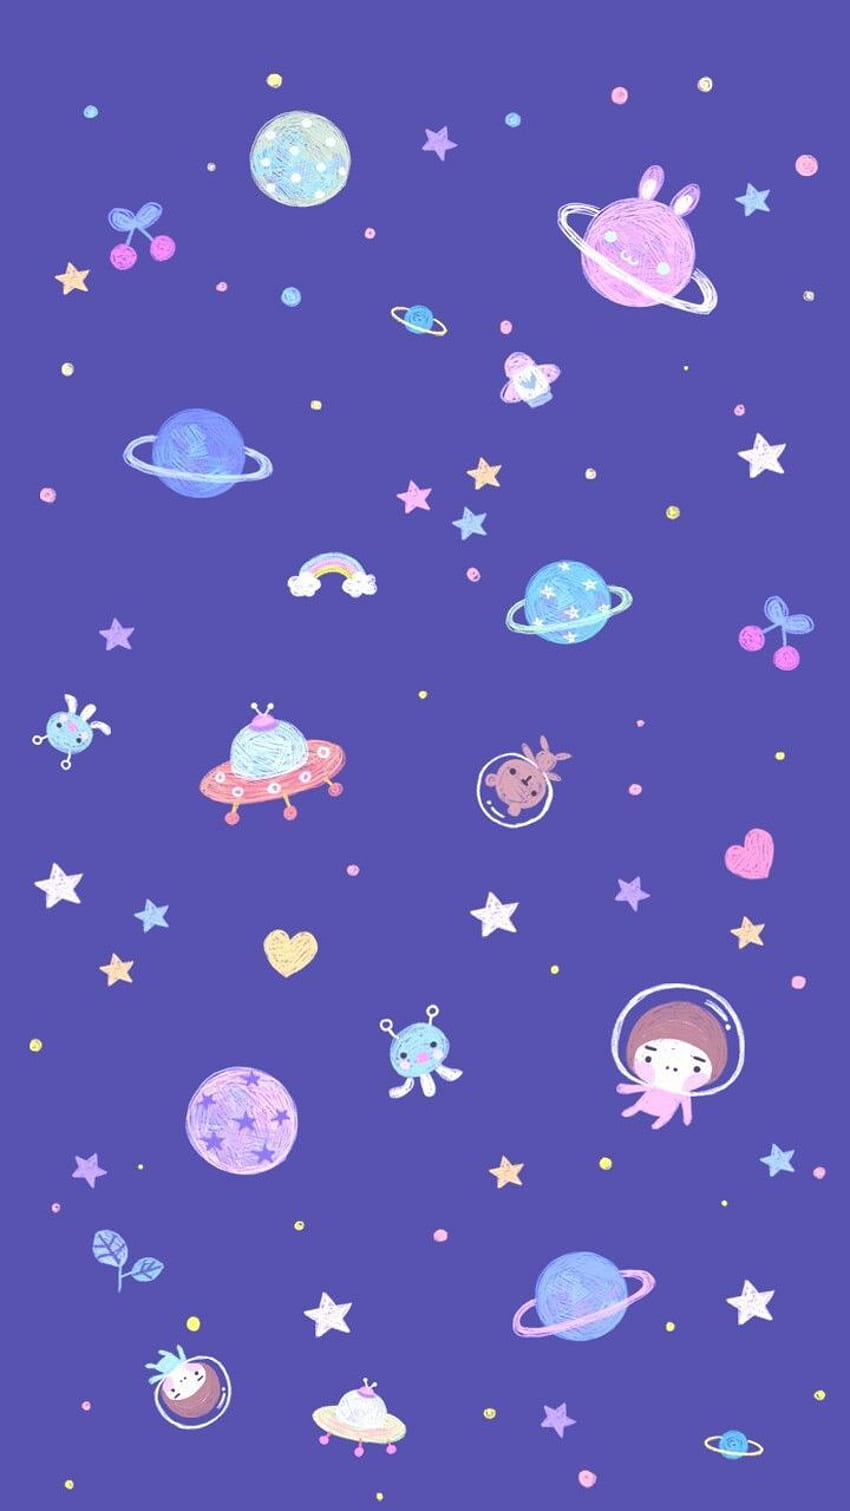 Cute Space Images  Free Download on Freepik